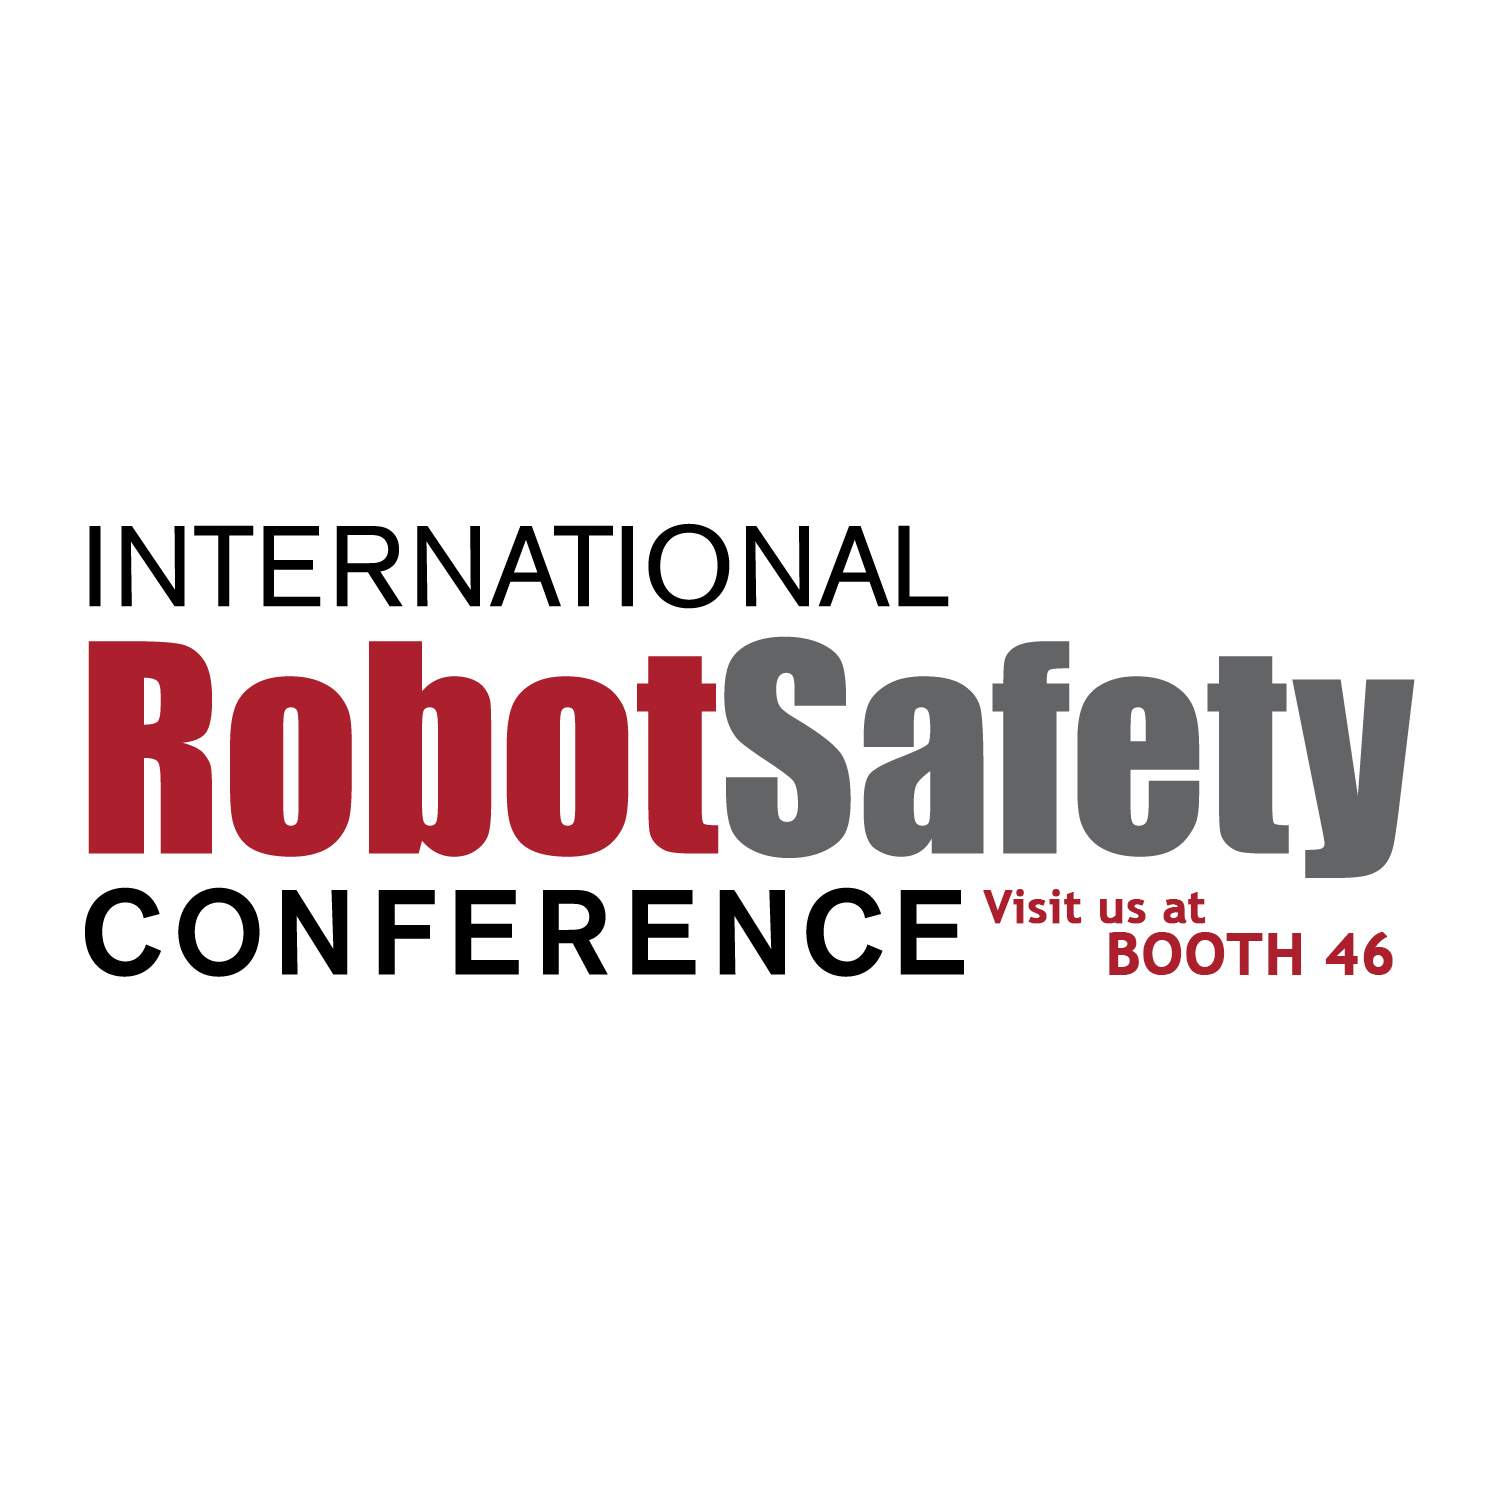 International Robot Safety Conference Visit Us at Booth 46